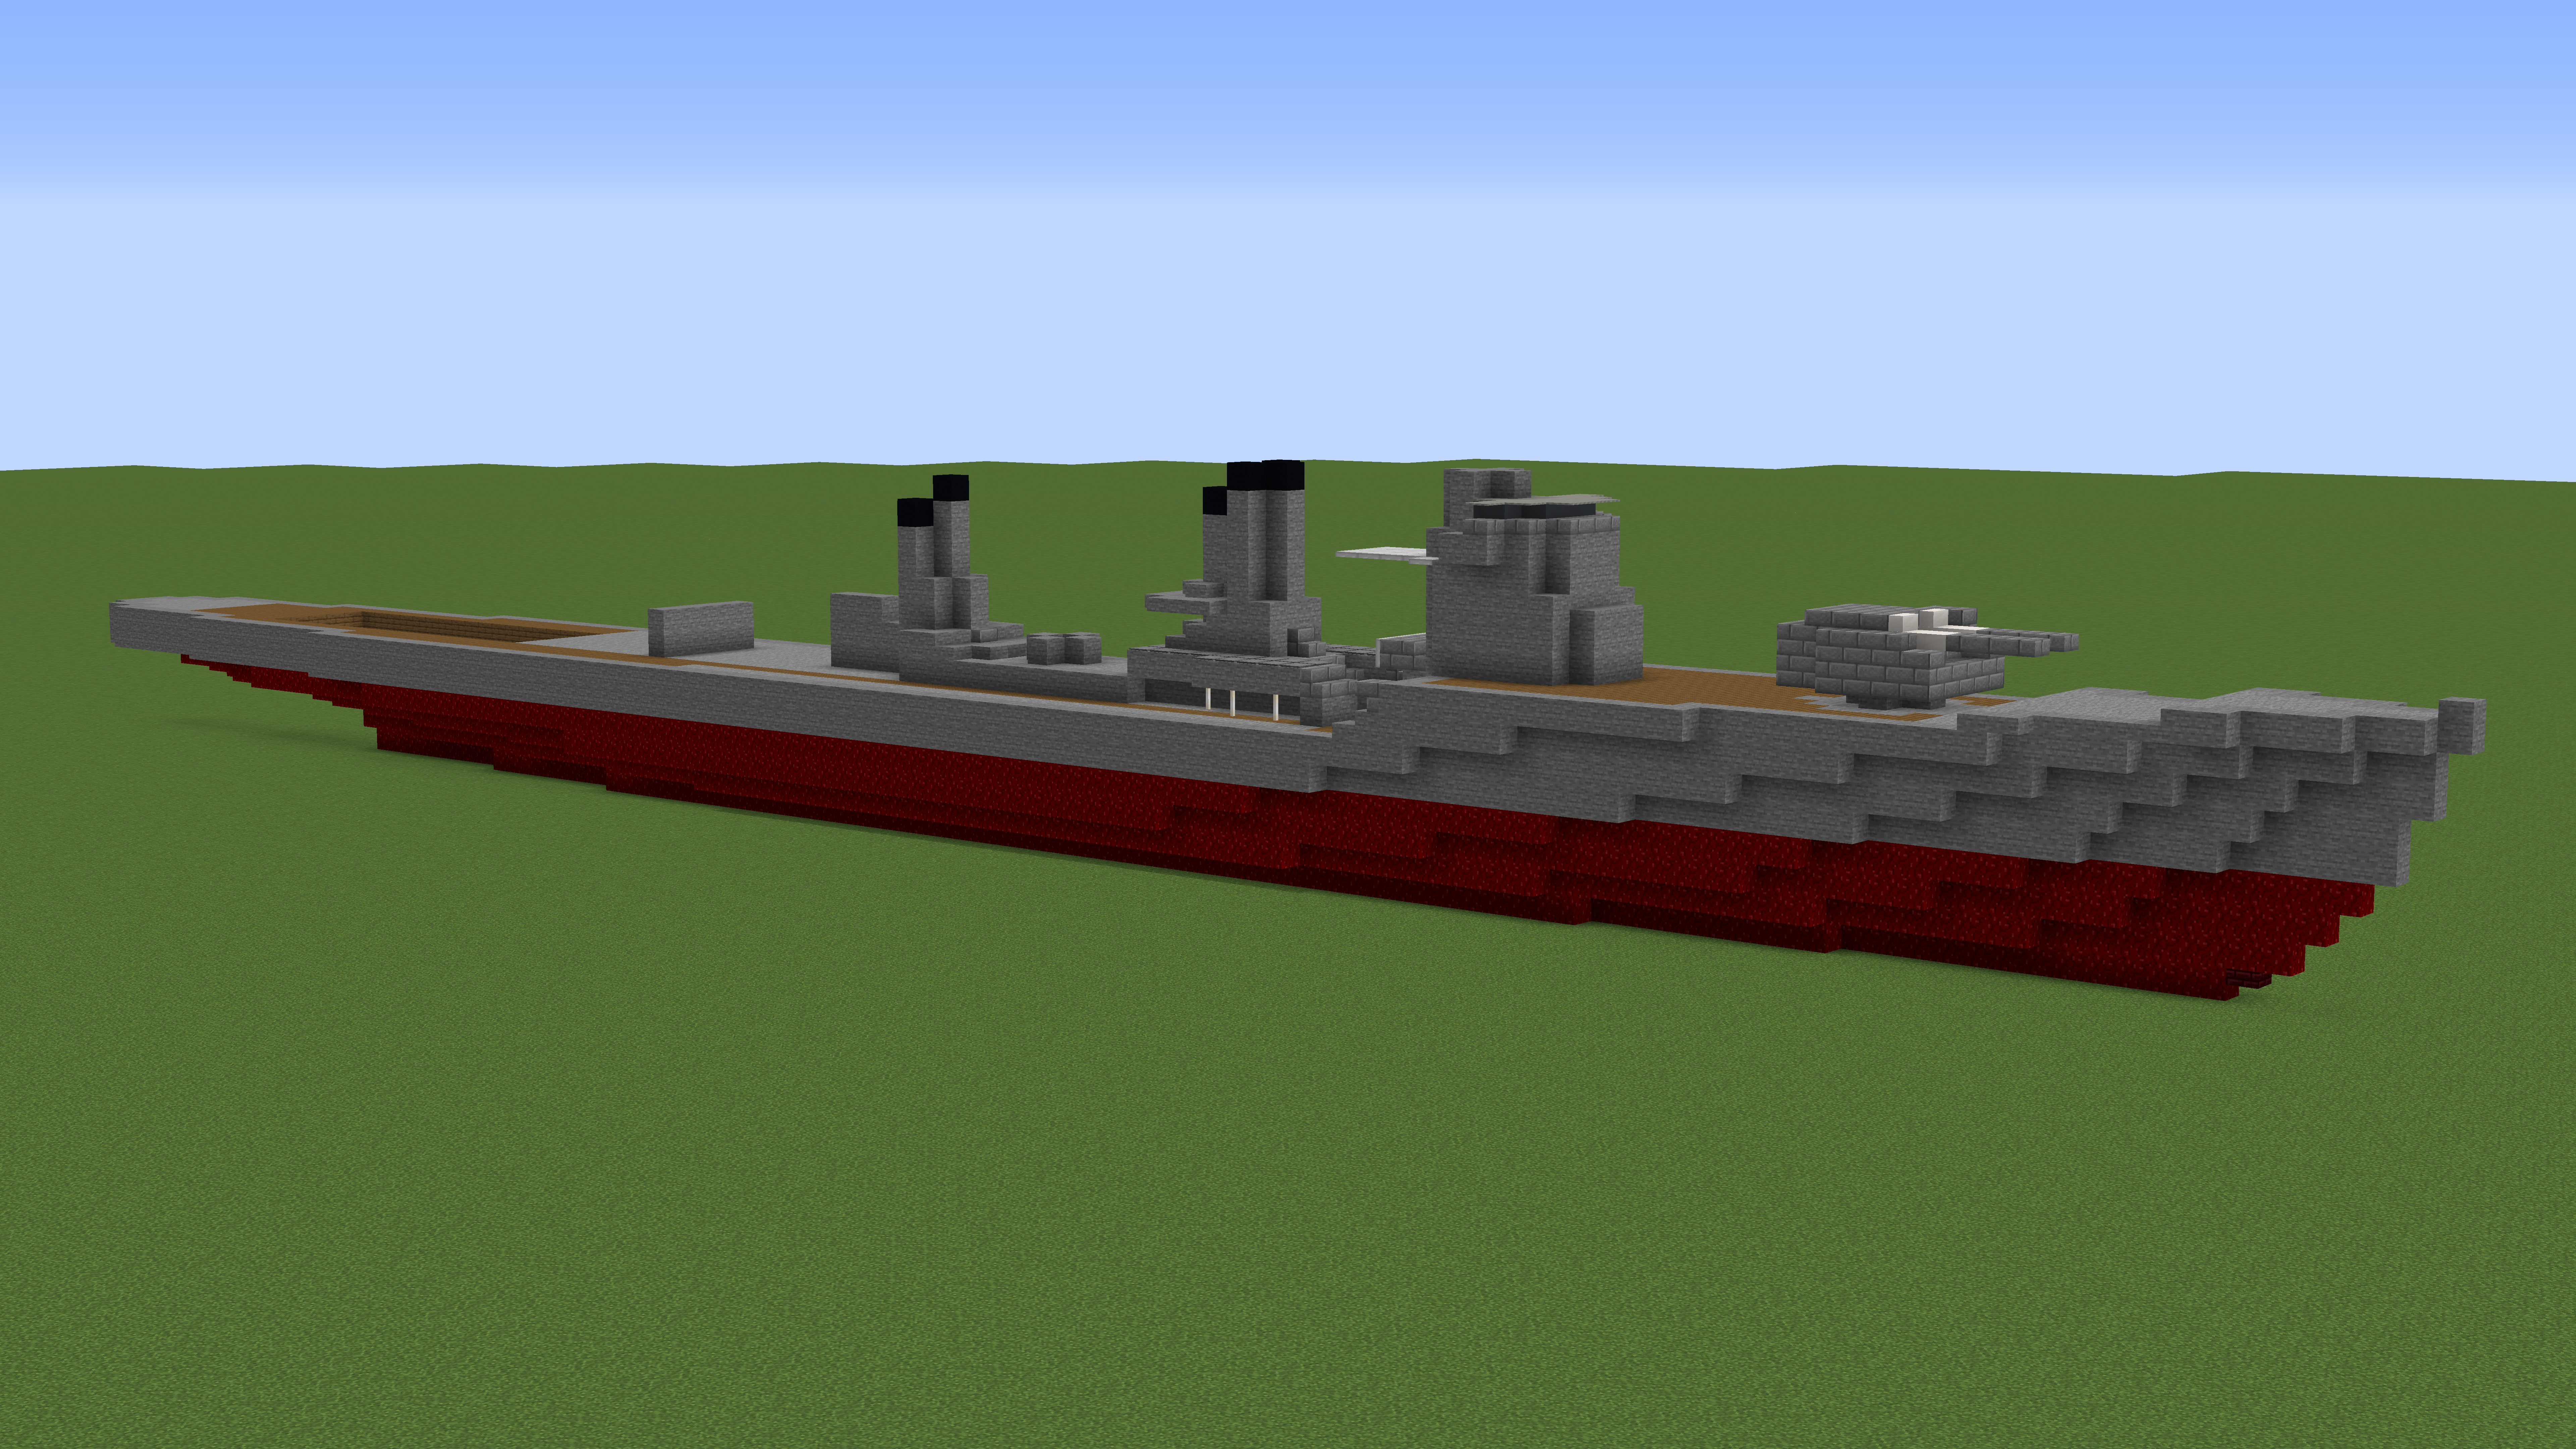 Someone subscribed to me. Looks like I have to build a ship now or something... I know the bow is rough, but I'm working on it. I've never built a ship of this size before, but I think after looking at enough submissions I kinda understand how they should be shaped.